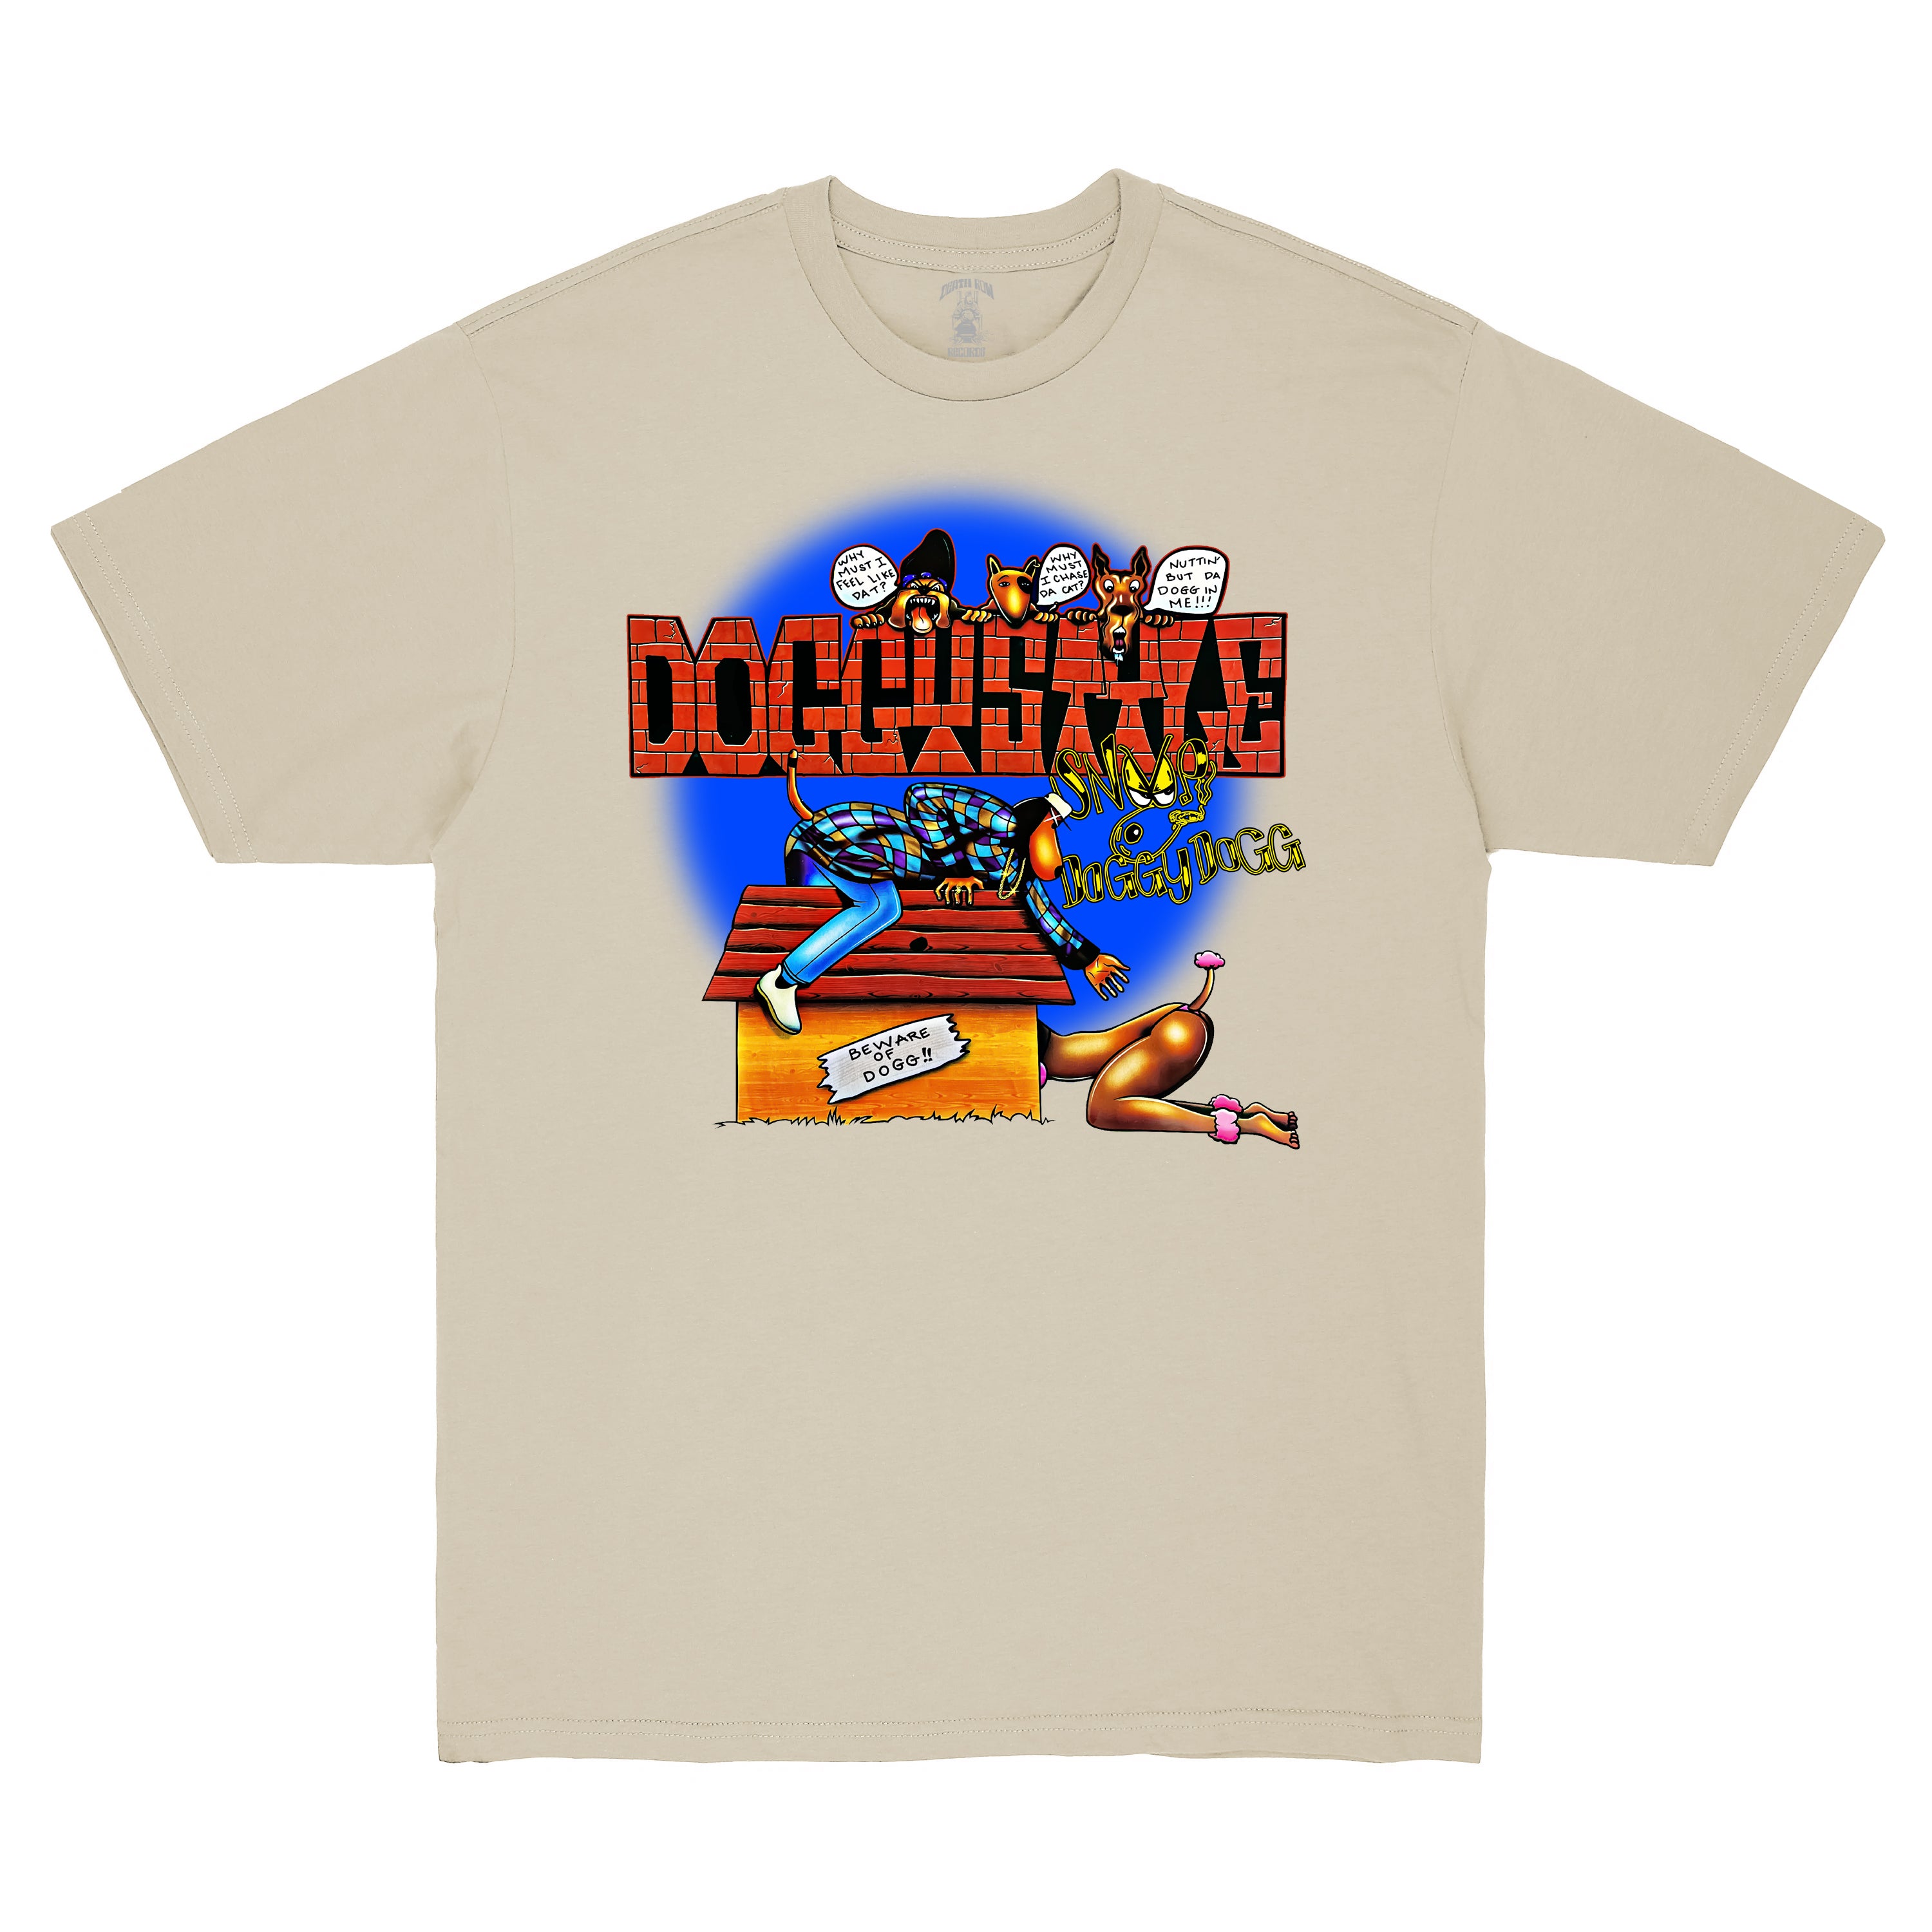 Doggystyle Album Cover Tee v2